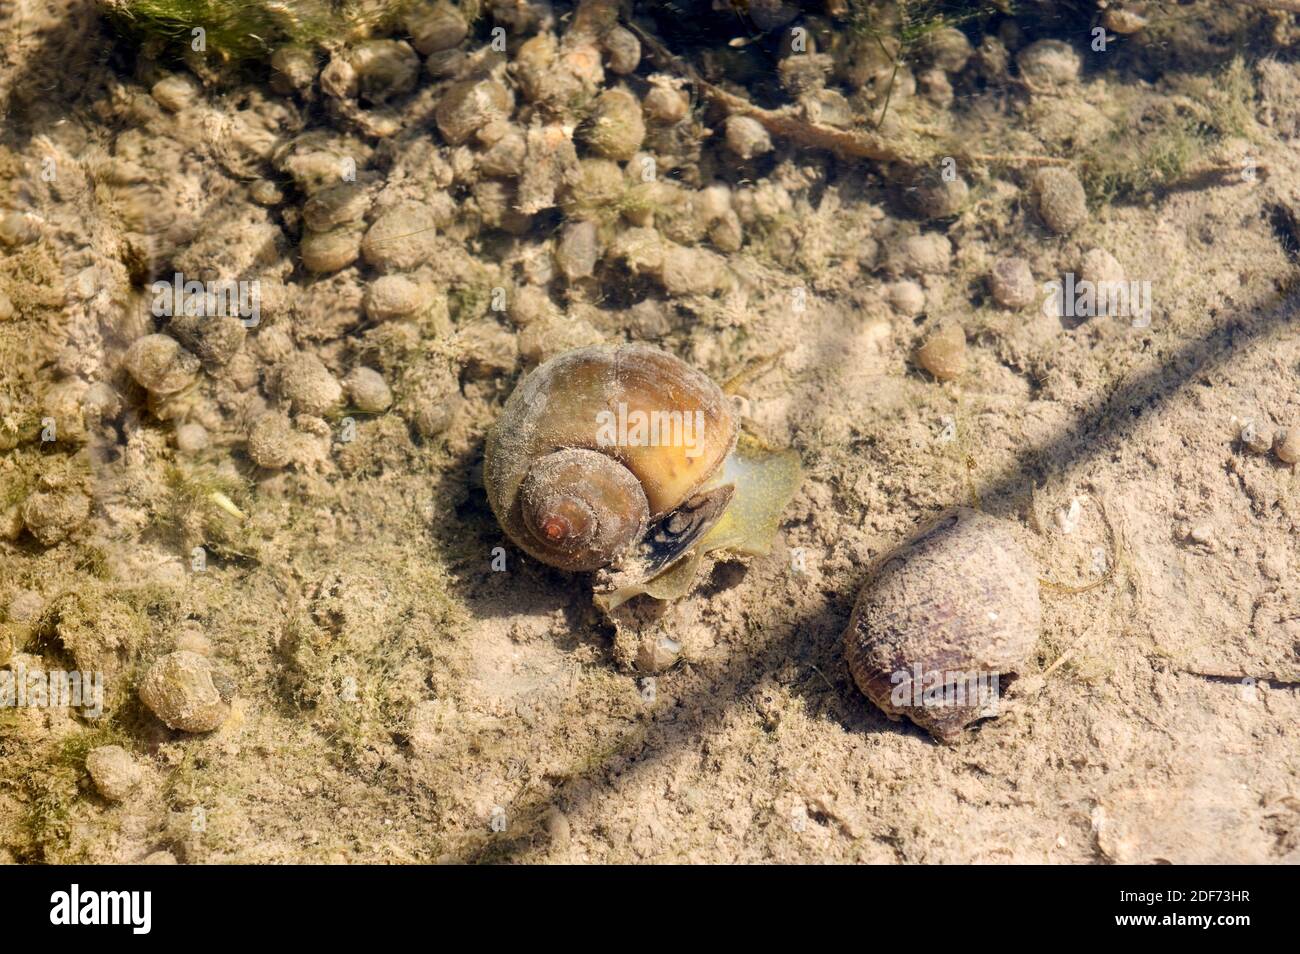 Apple snail (Pomacea maculata or Pomacea insularum) is an invasive freshwater snail native to South America. This photo was taken in a rice paddy of Stock Photo